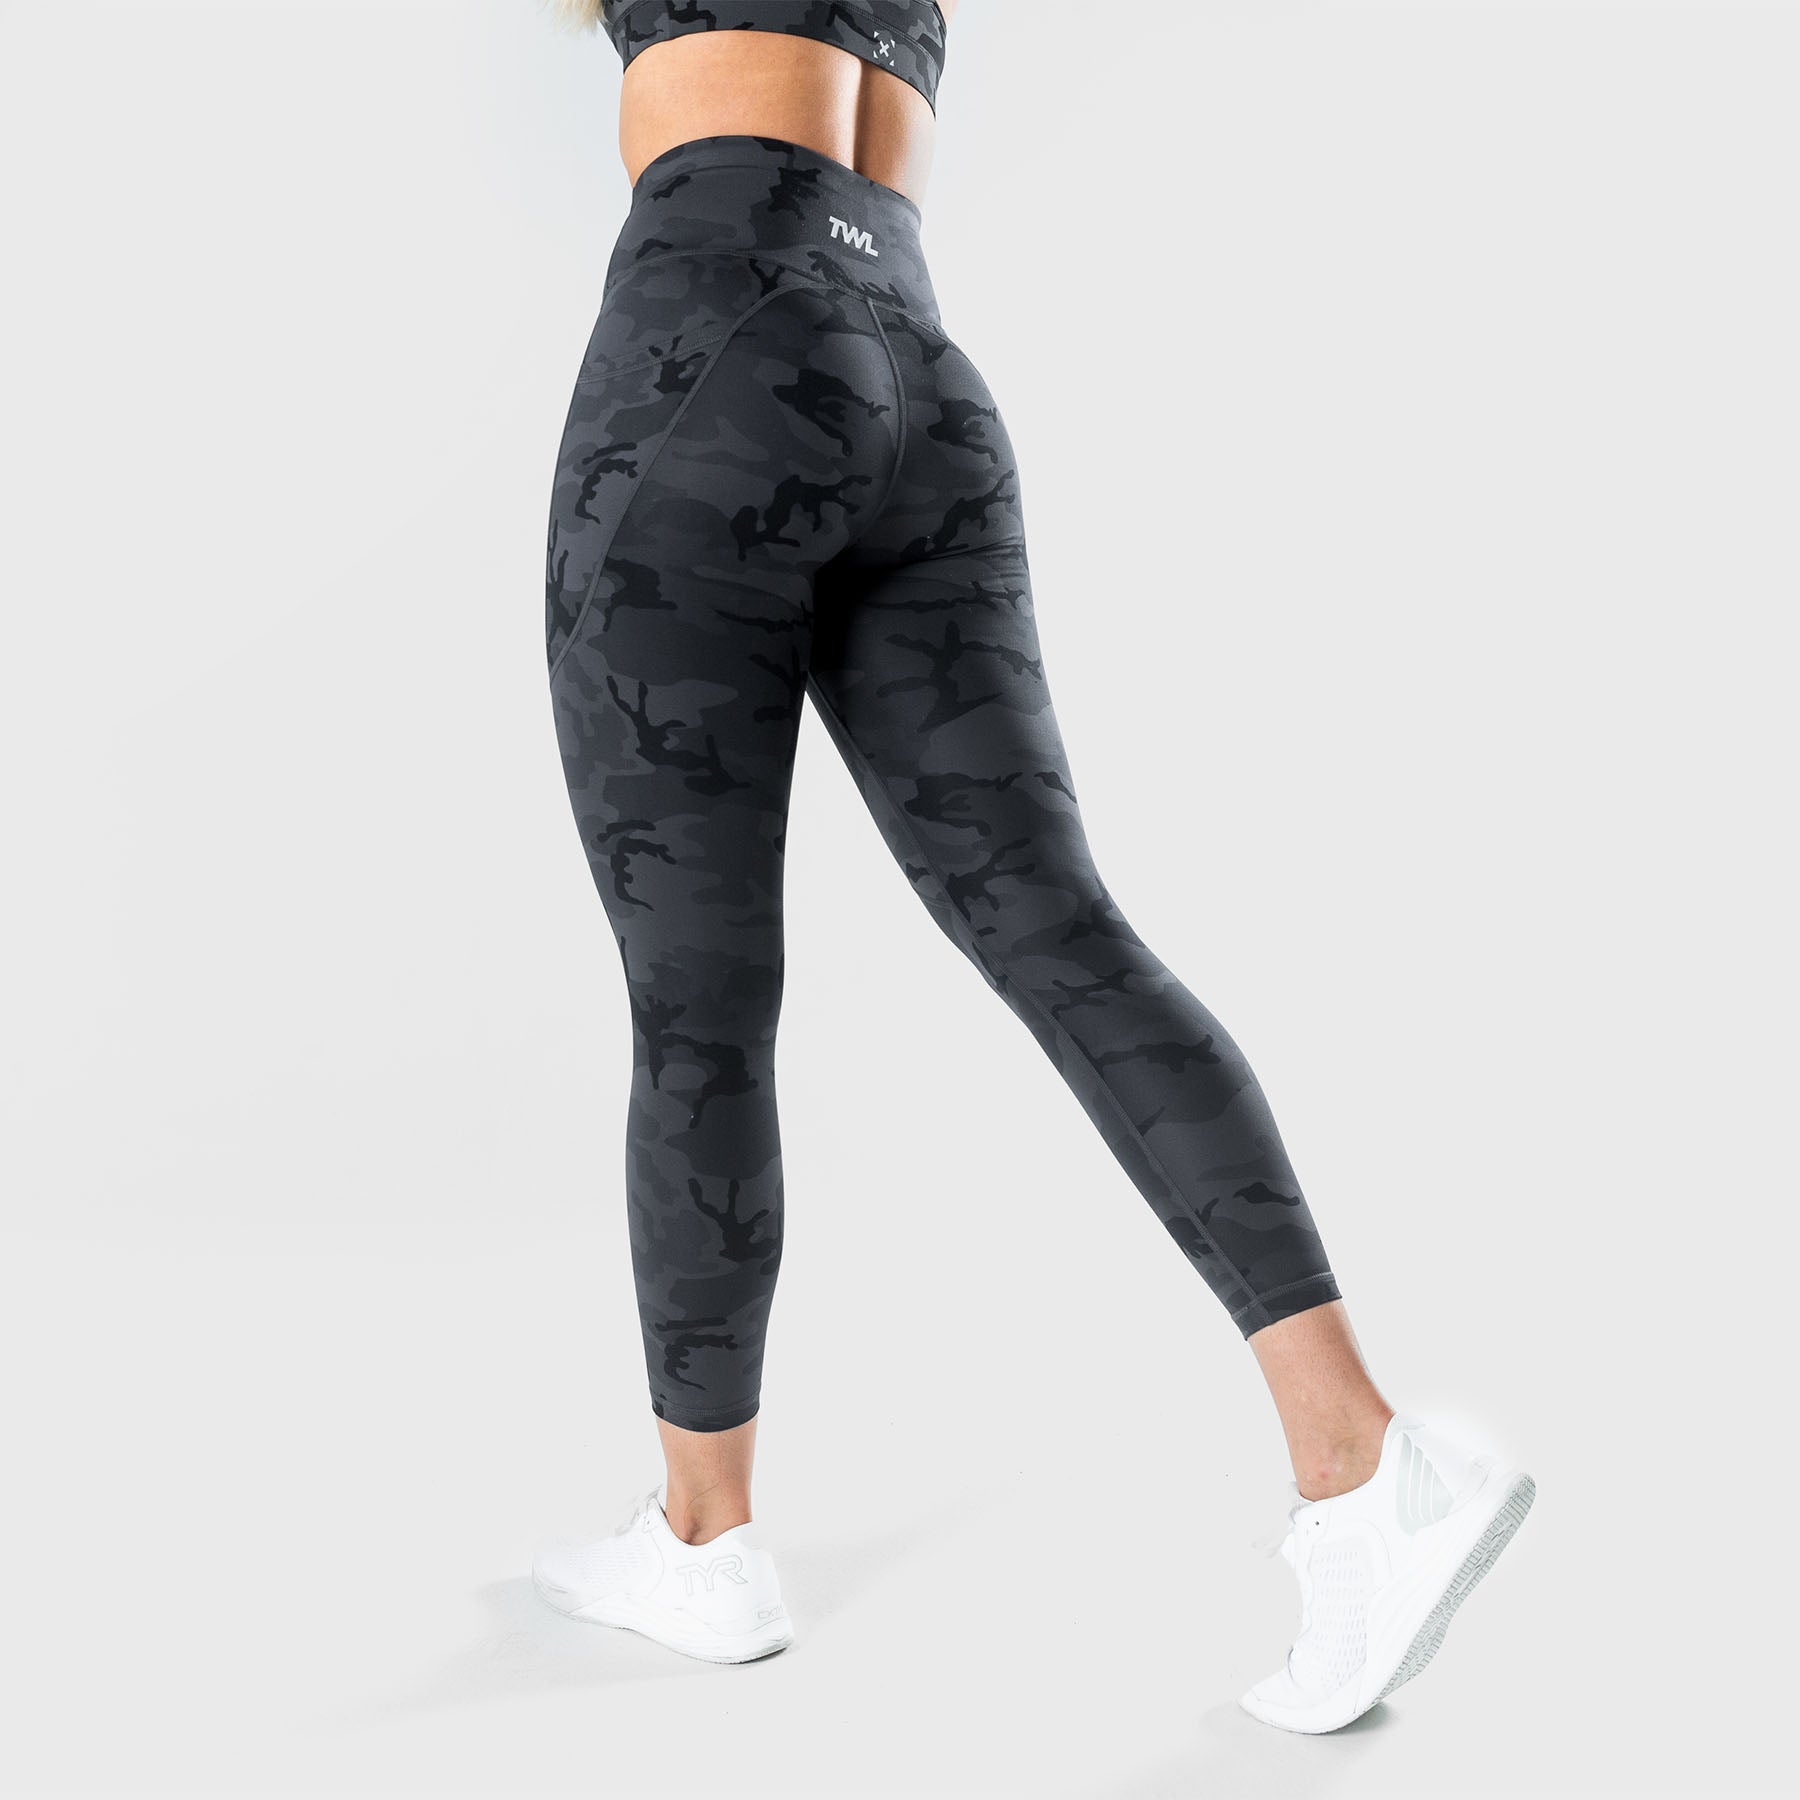 NWT Vie Active Rockell 7/8 Leggings in Black Camo Brushed Sculpt